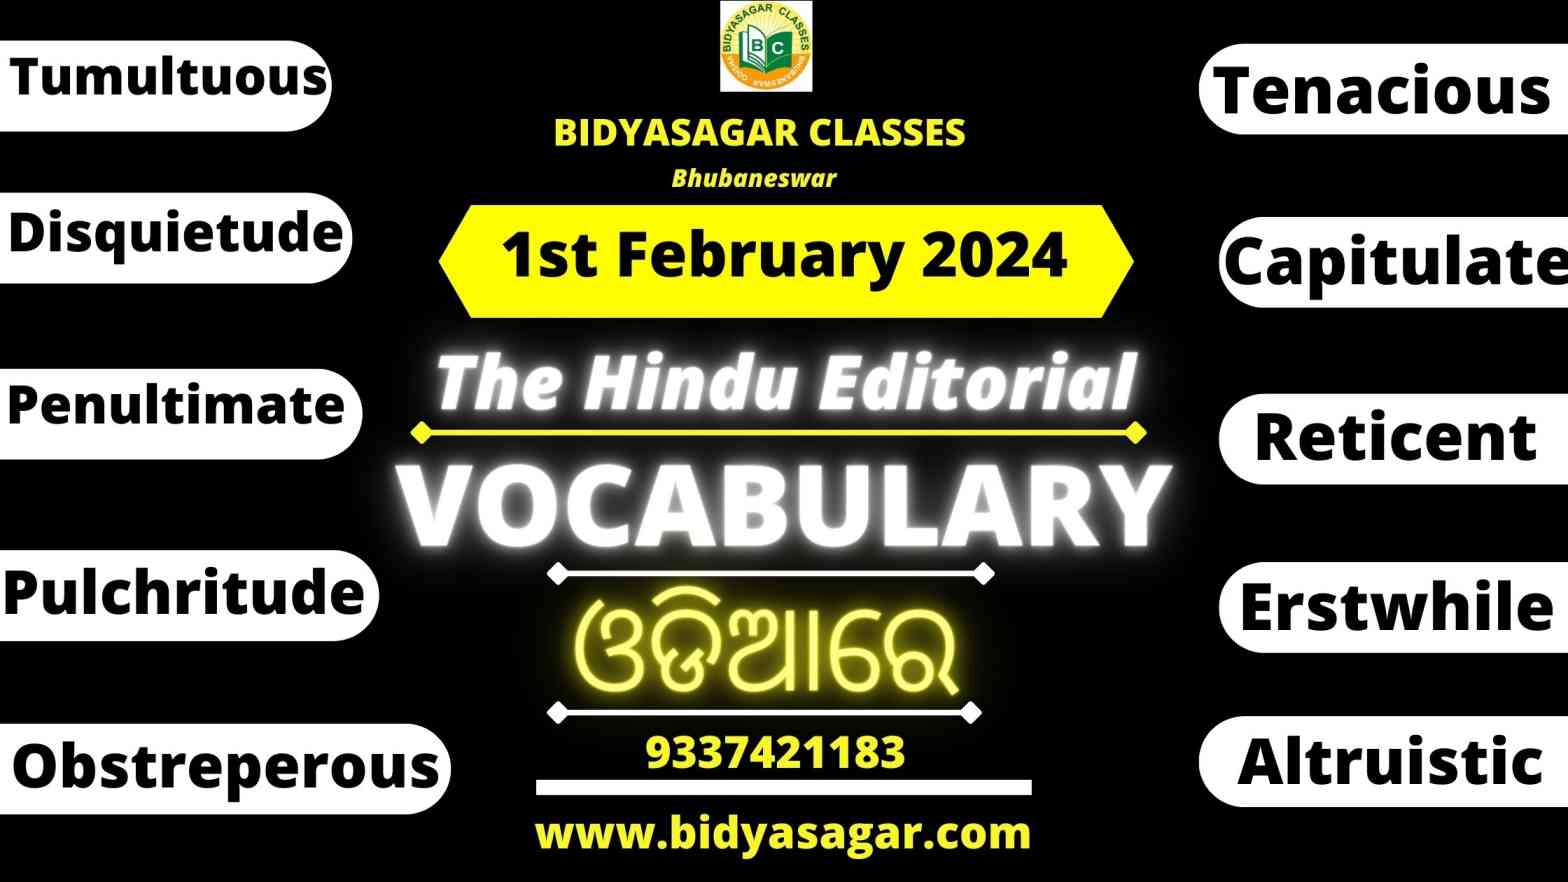 The Hindu Editorial Vocabulary of 1st February 2024